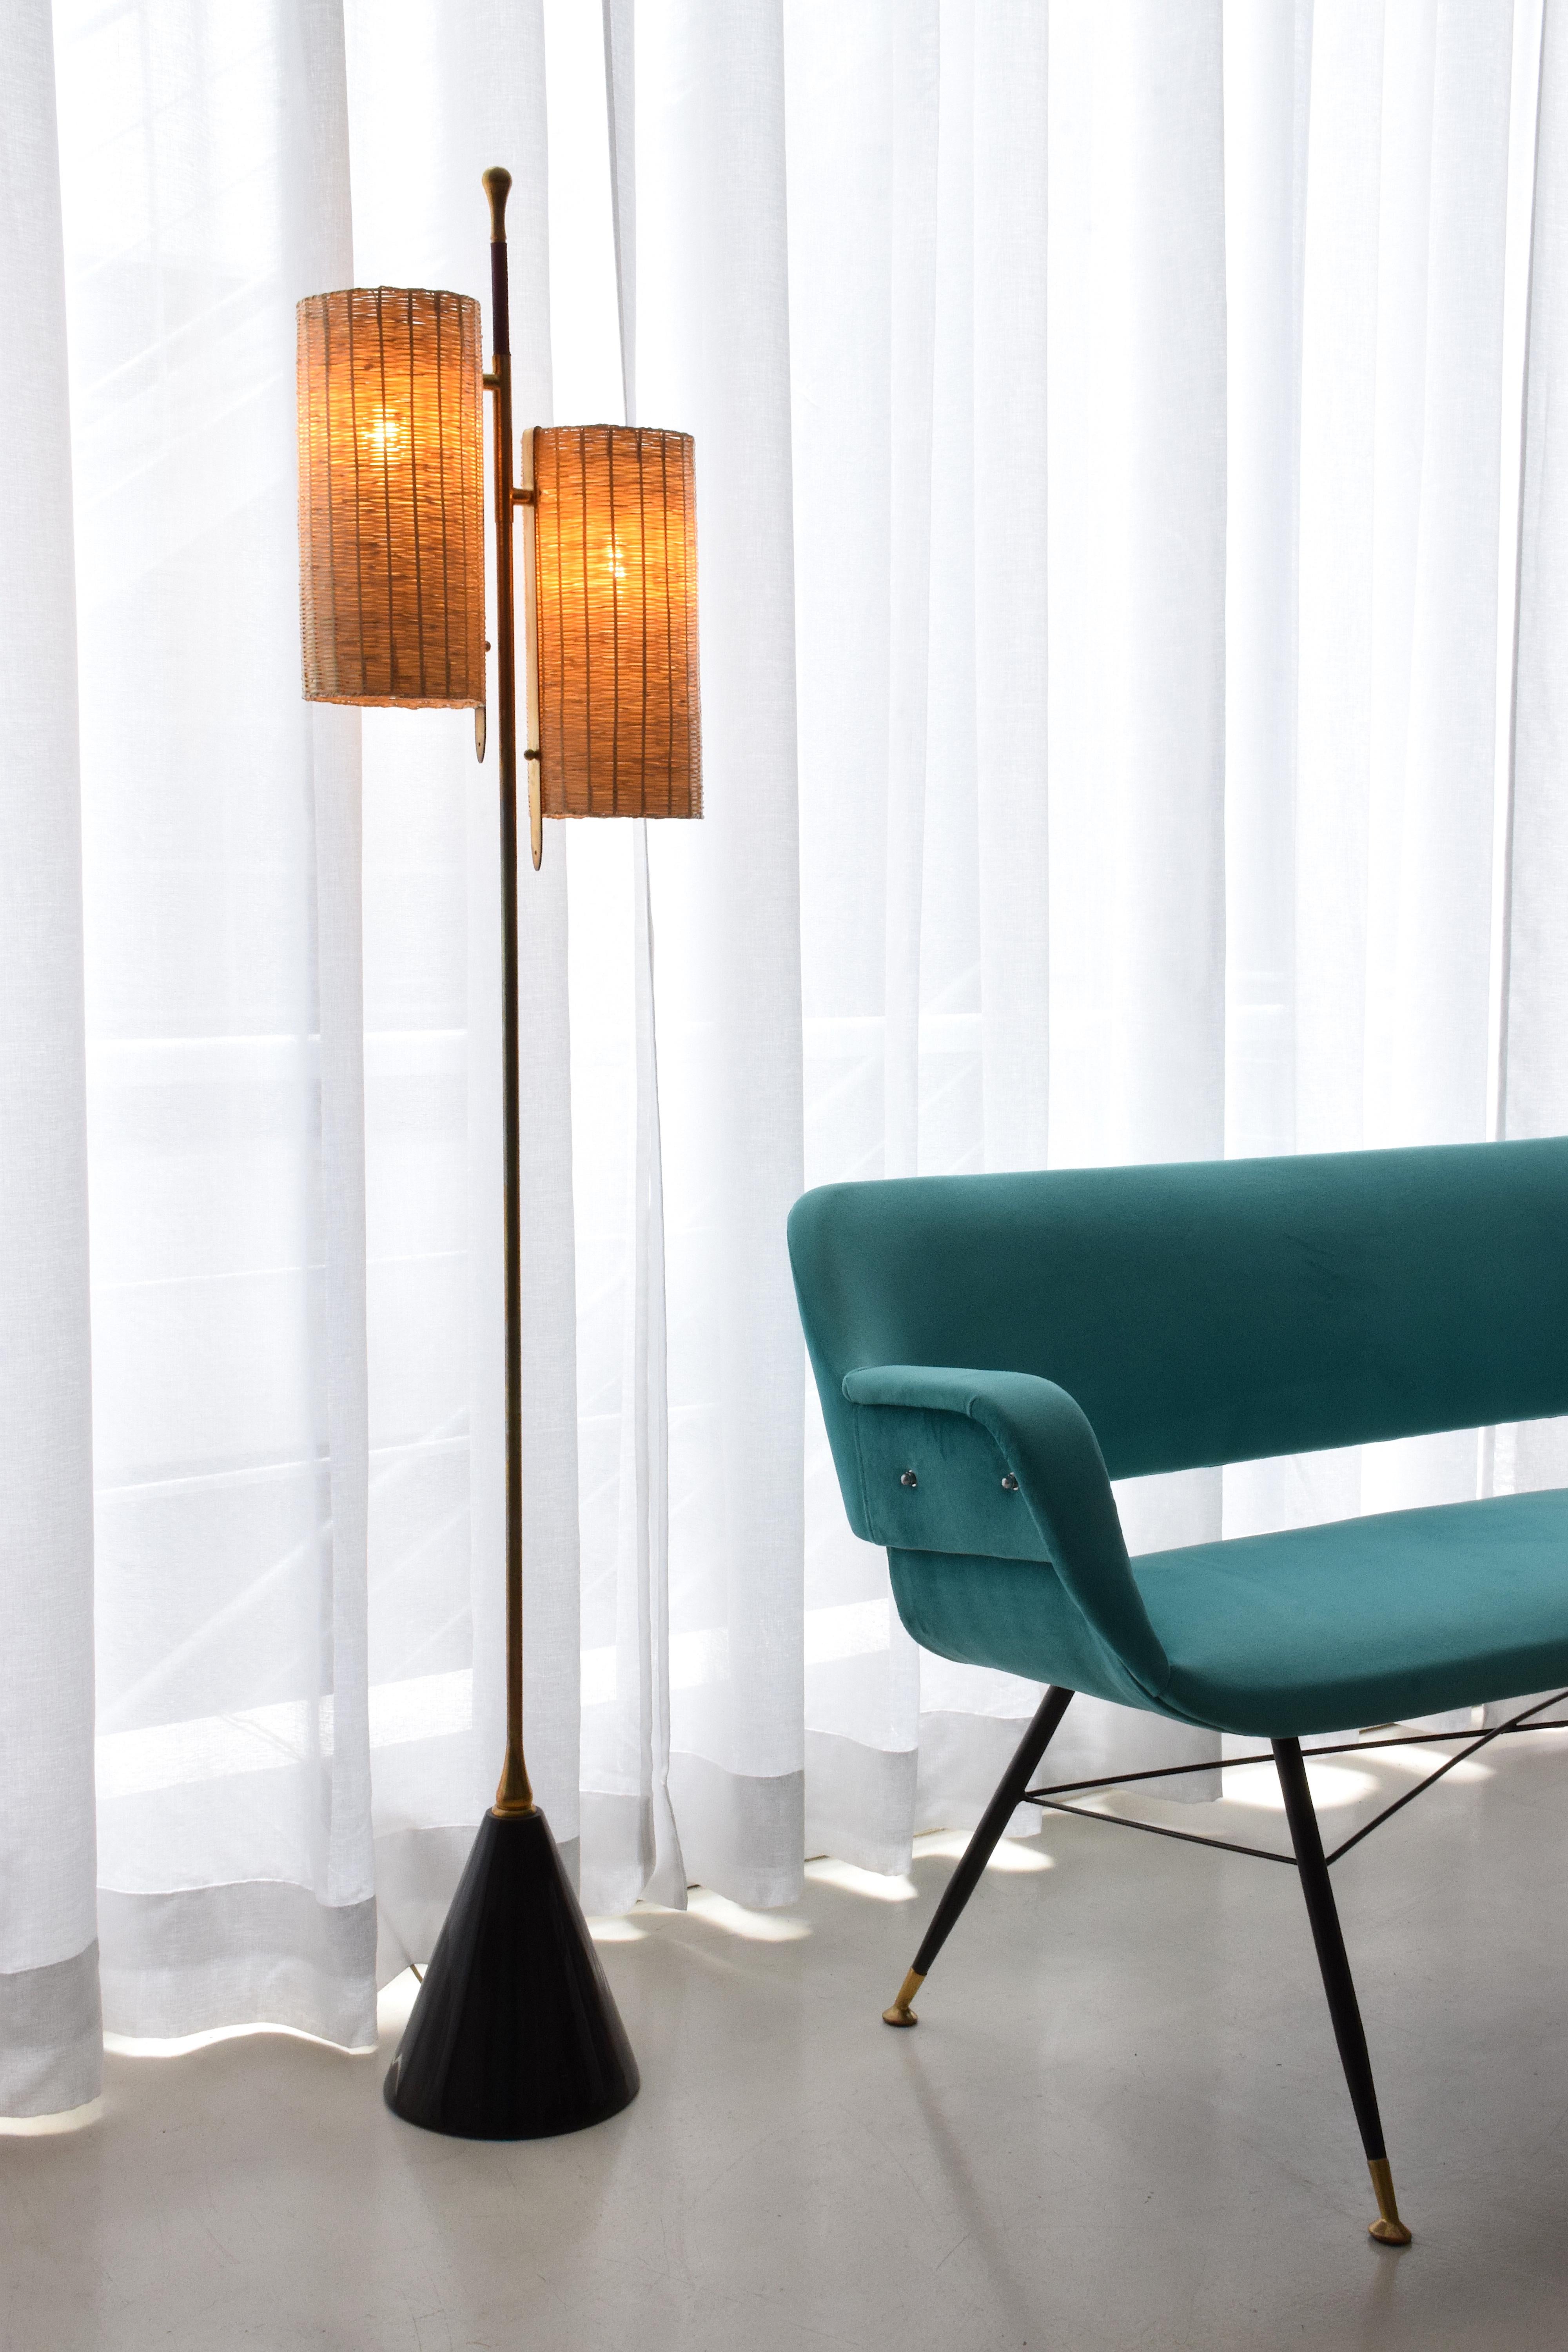 A medium-sized light composed of a solid brass stand adorned with a leather sheathed detail at the top. The long cylinder shades are available in hand-woven wicker or fabric. Option to choose between a black, white or green marble base.

2x60 W Max